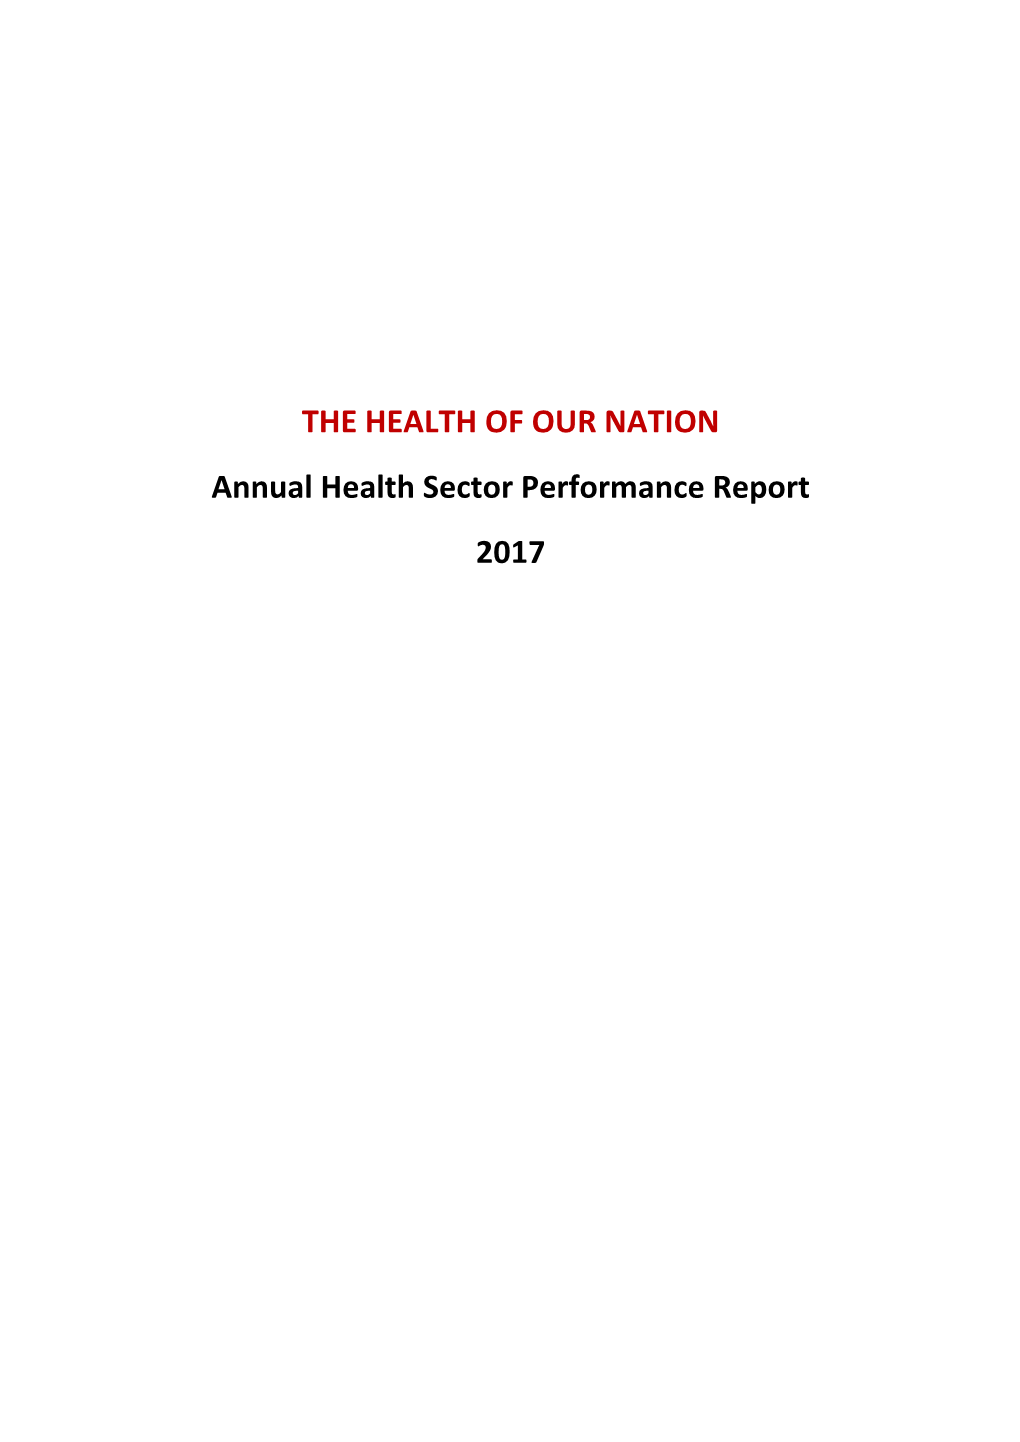 Annual Health Sector Performance Report 2017